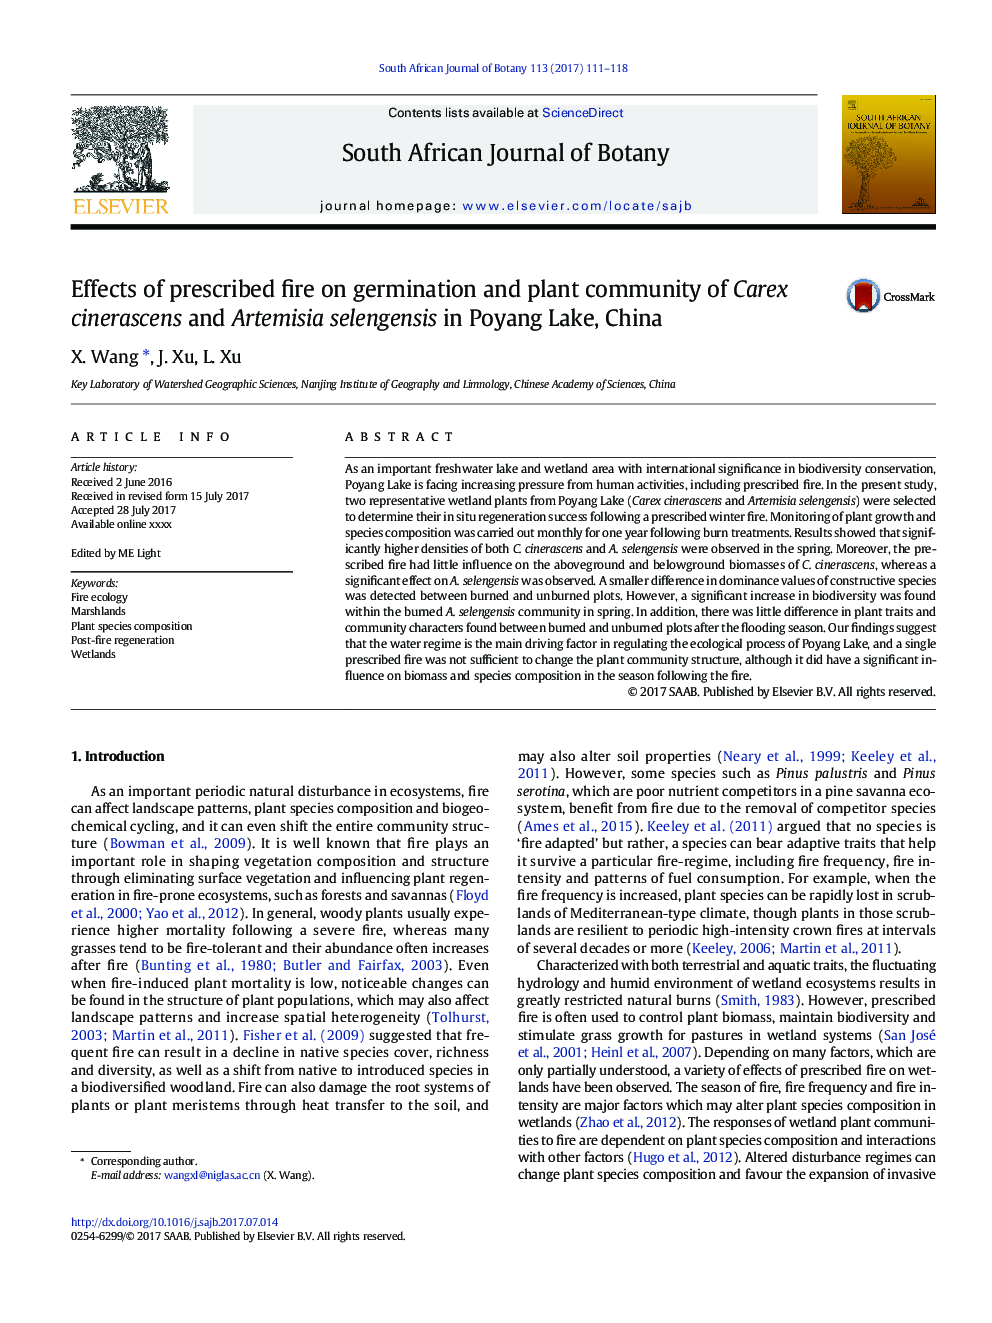 Effects of prescribed fire on germination and plant community of Carex cinerascens and Artemisia selengensis in Poyang Lake, China